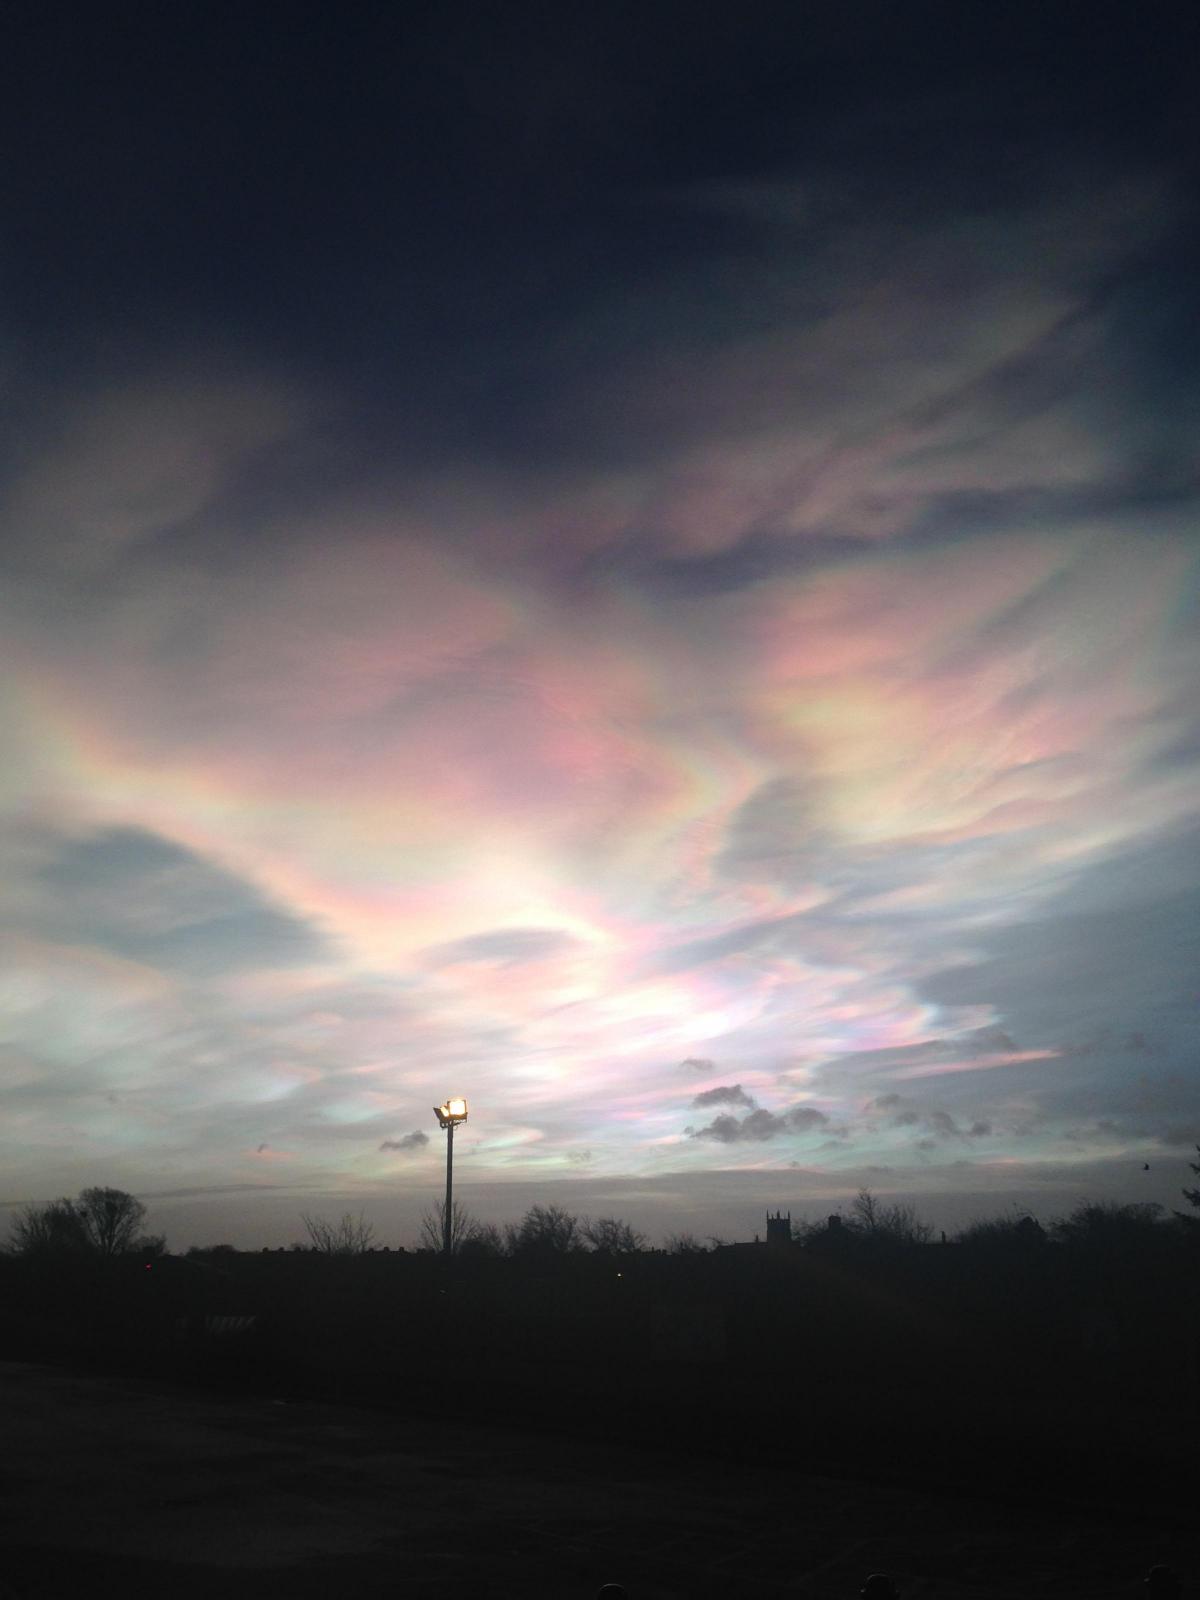 Josie Mead's picture of clouds over Malton